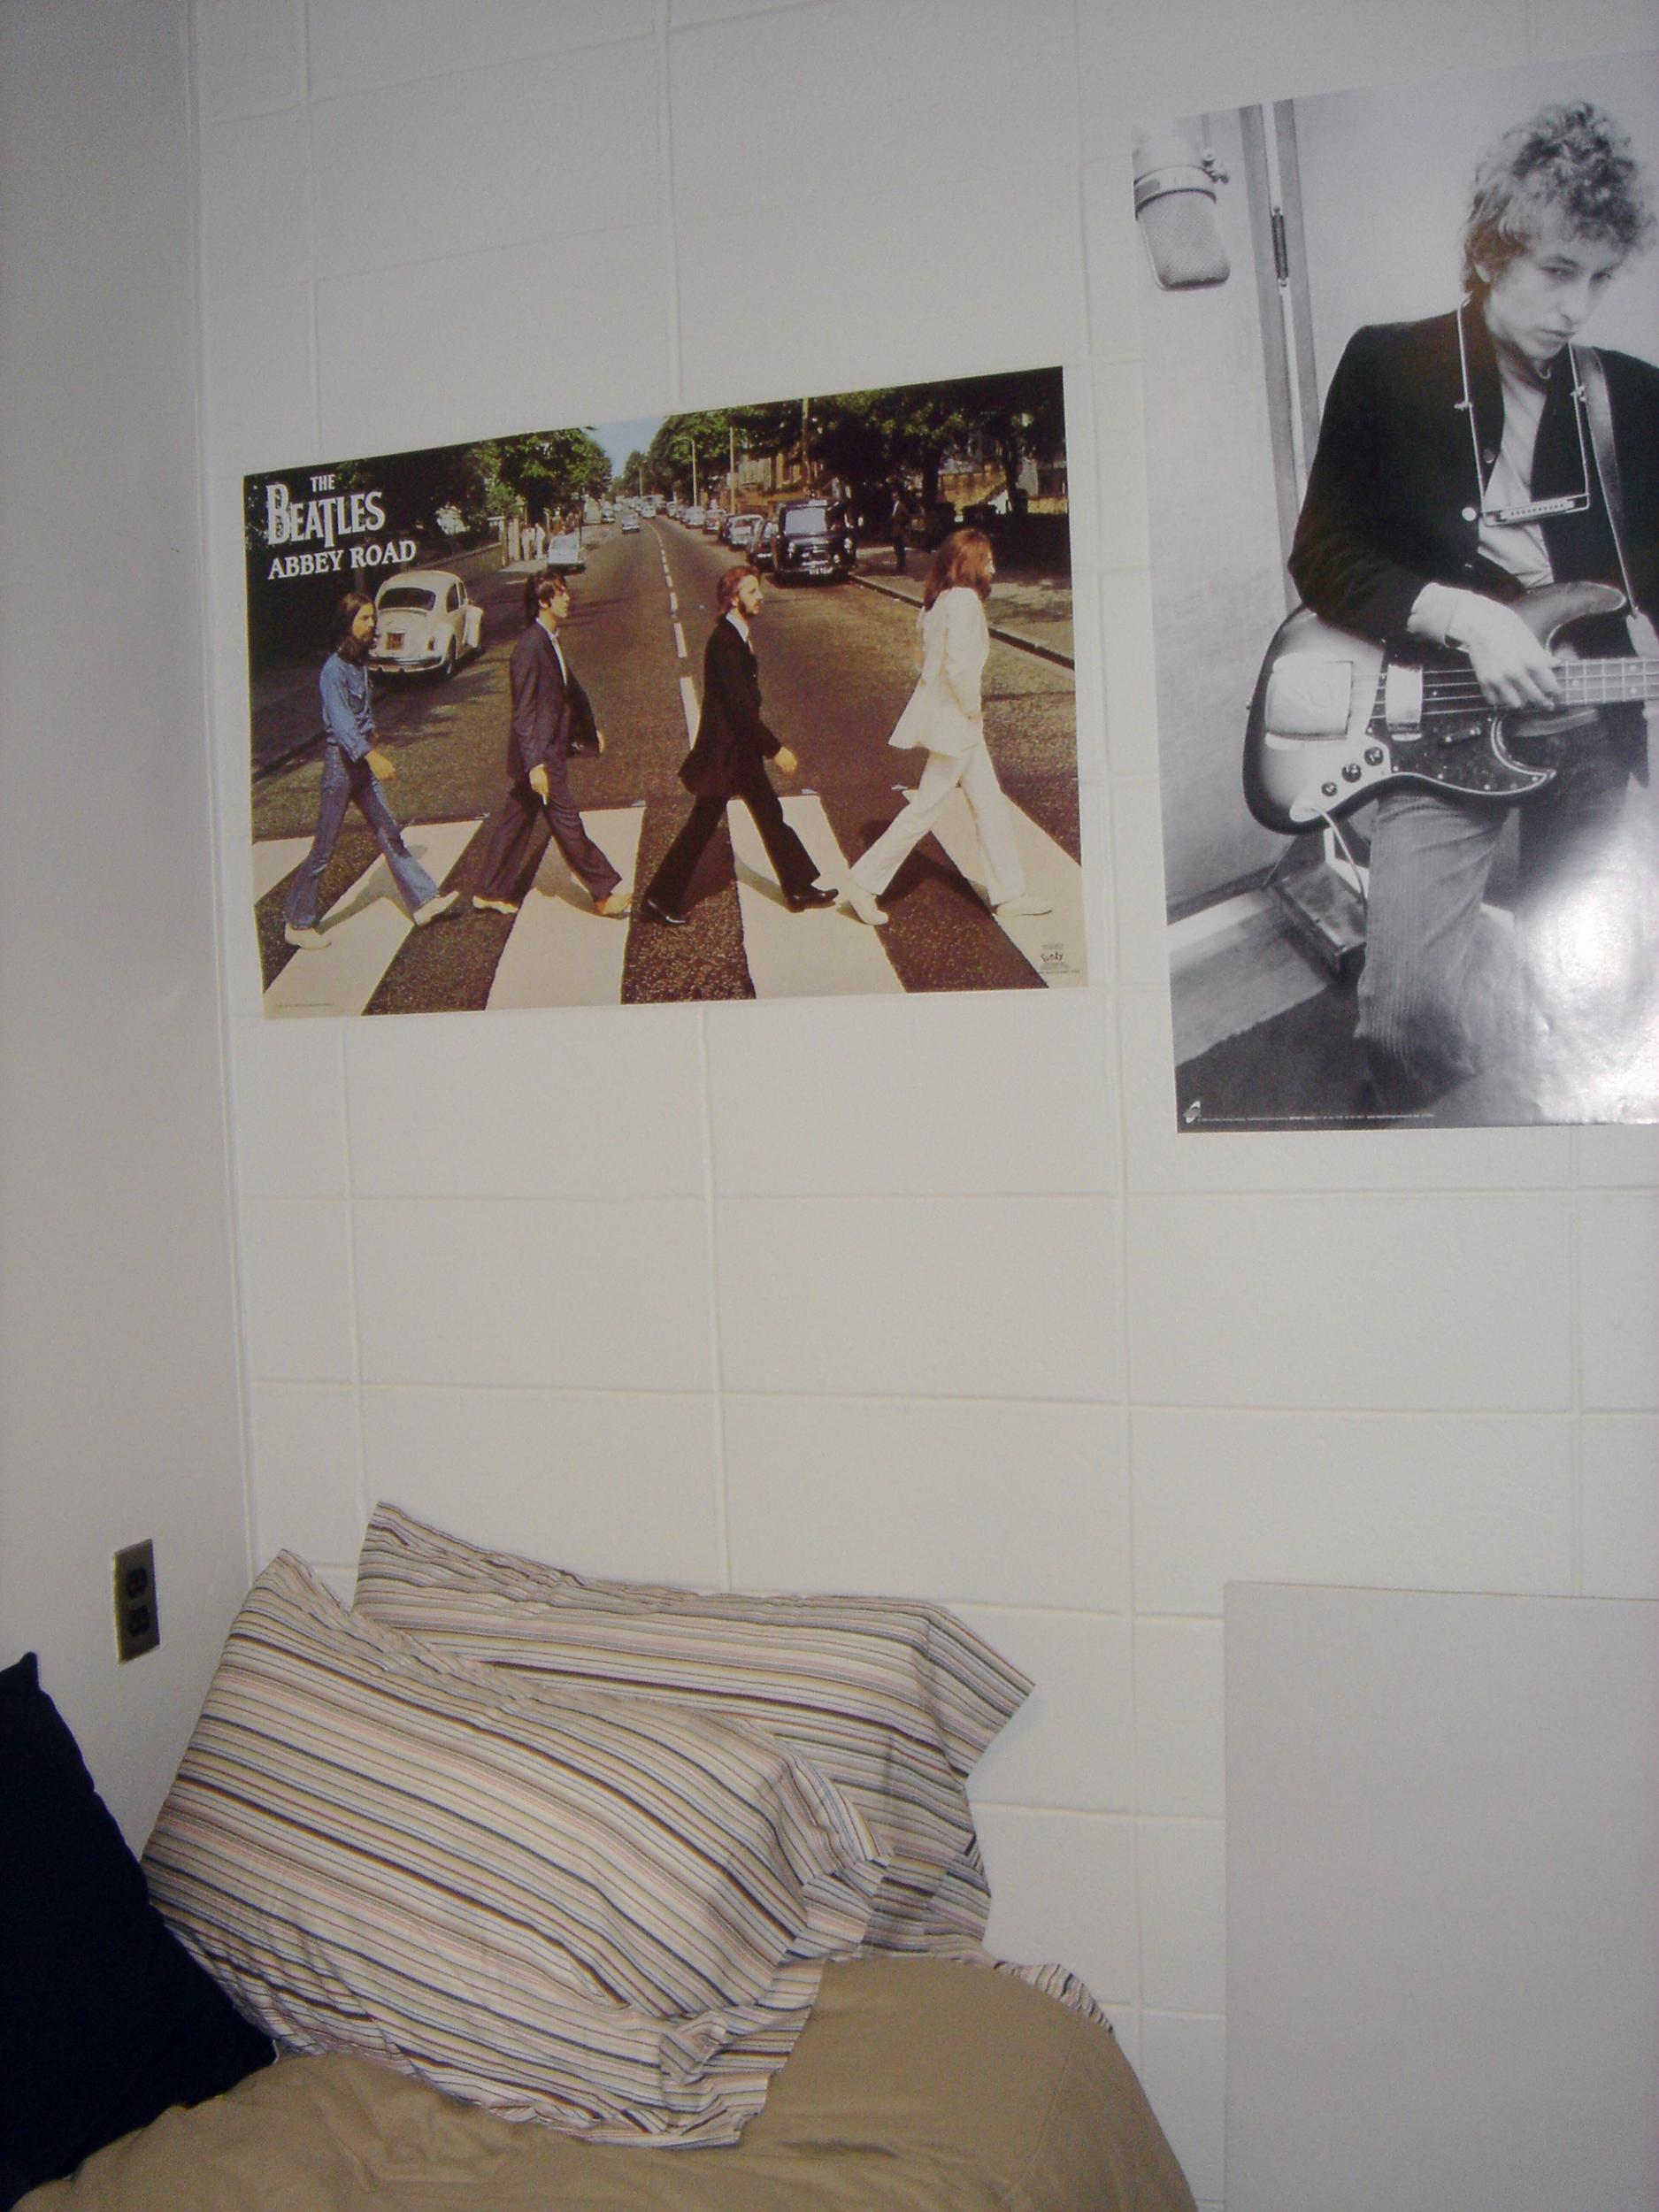 Posters on the wall in a dorm room